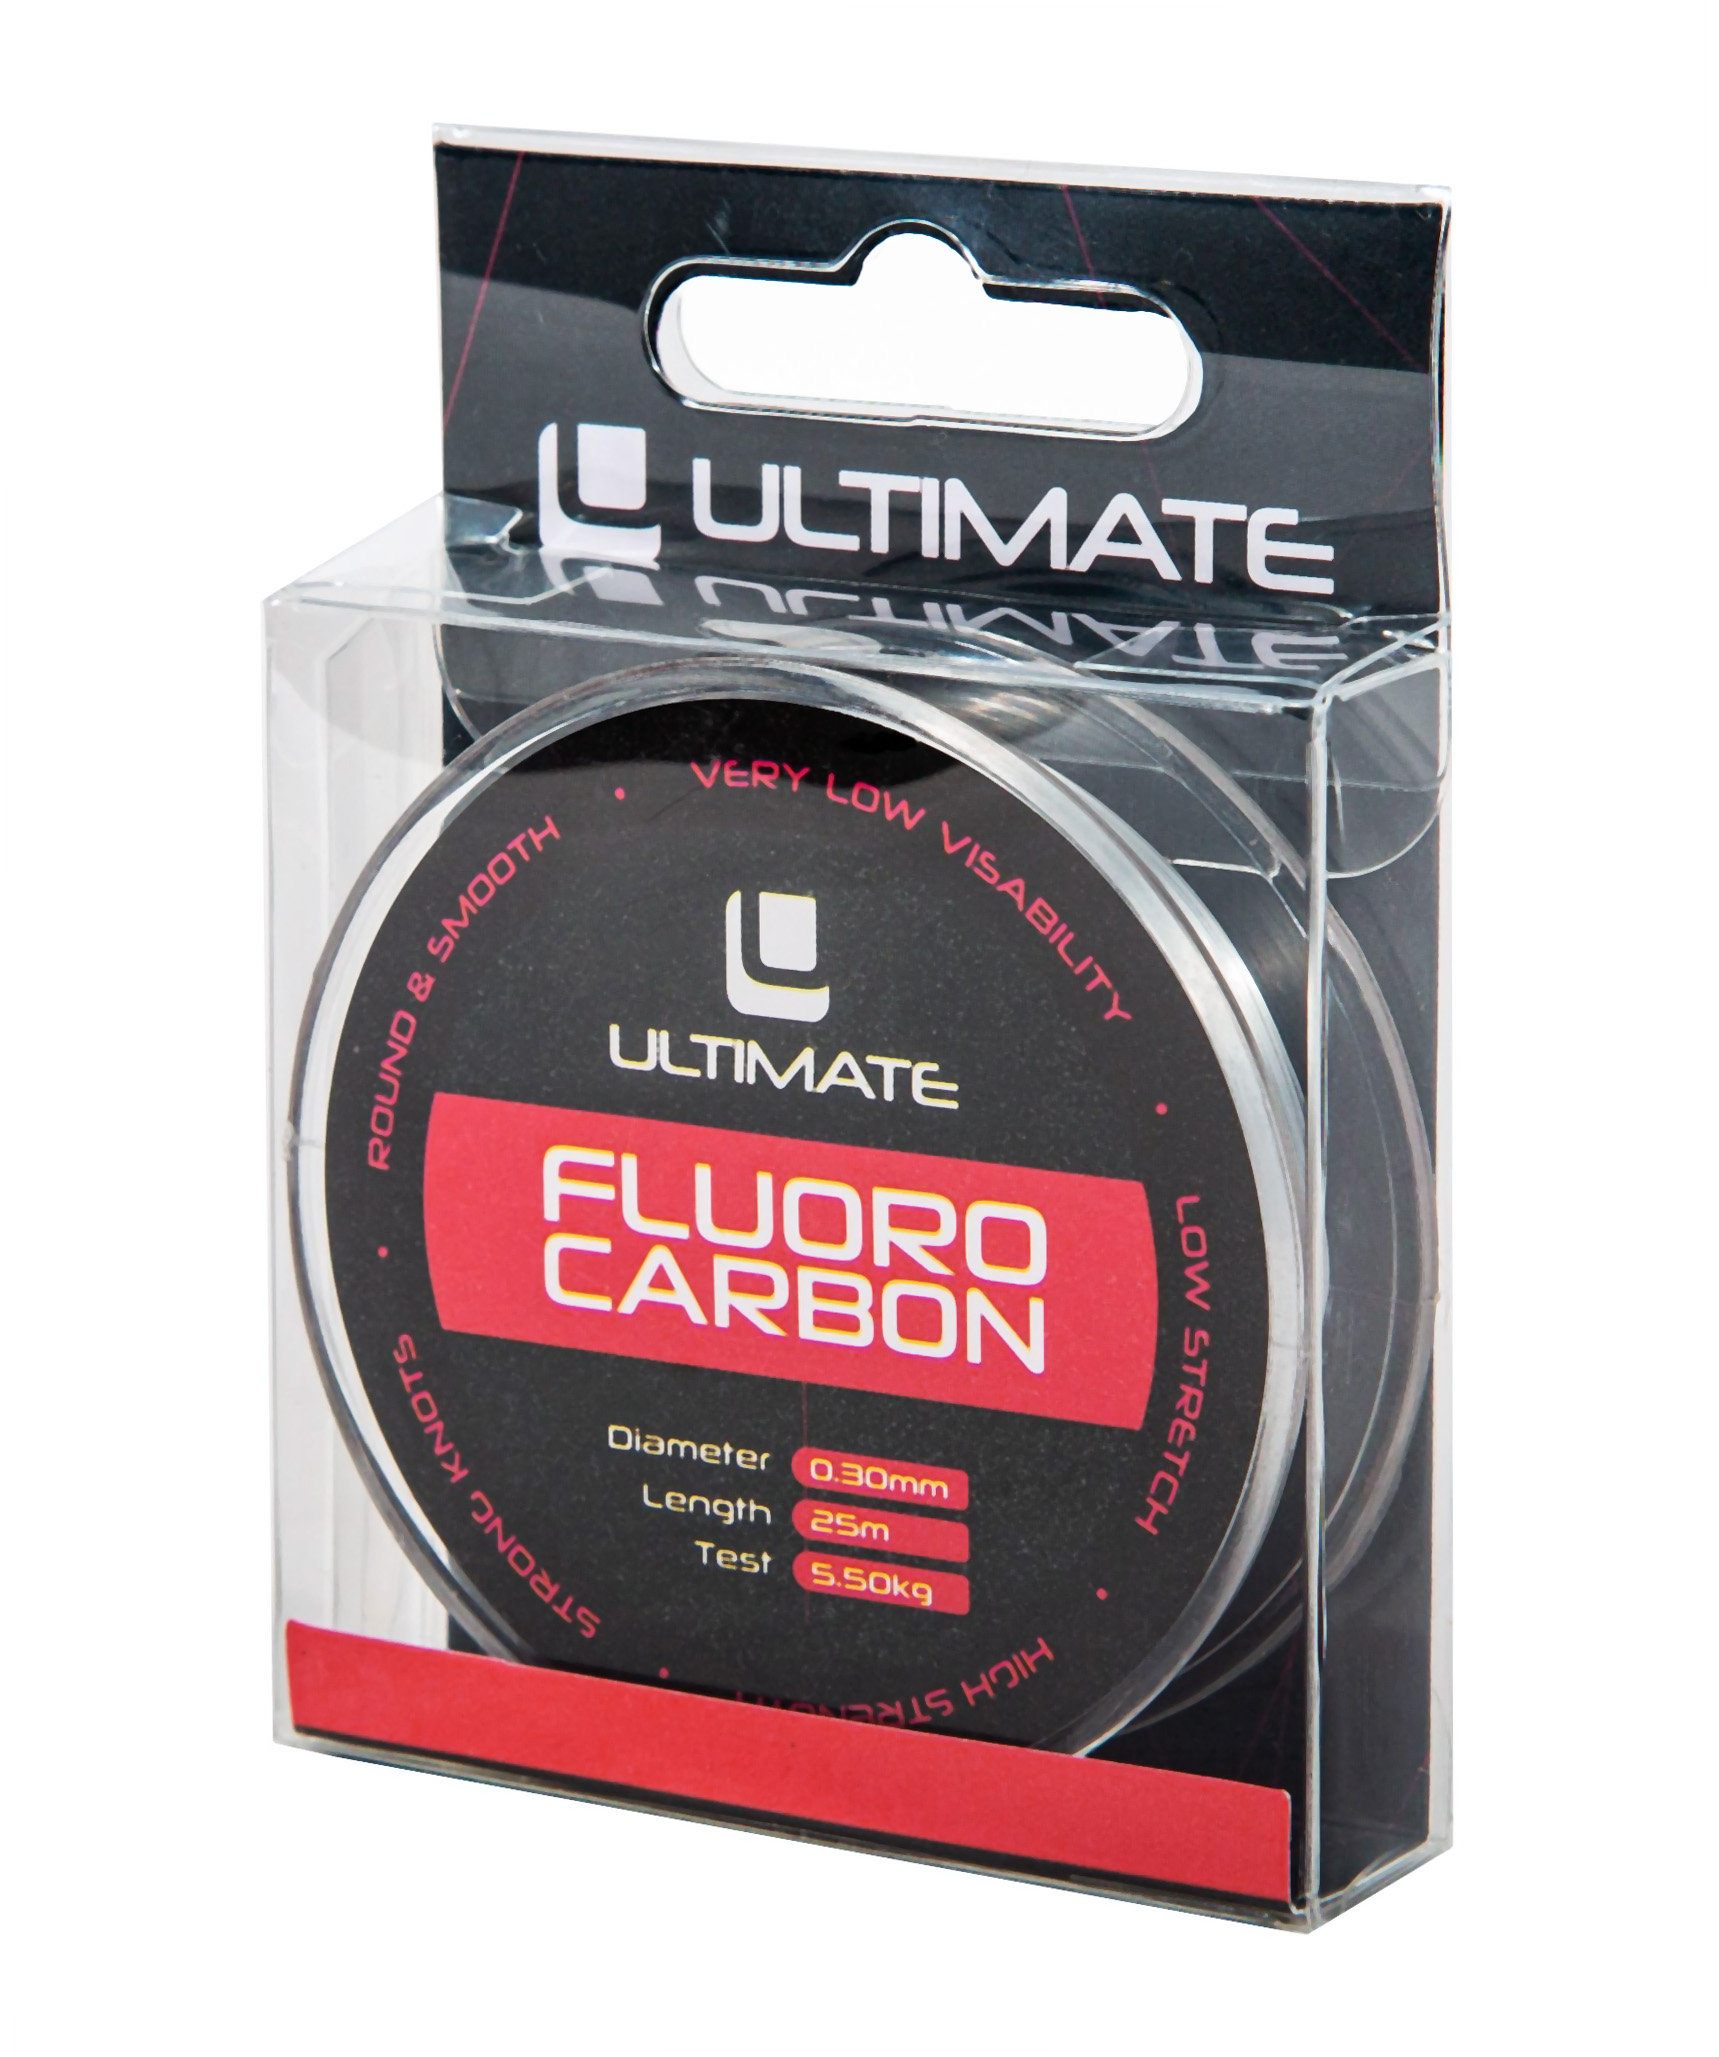 Ultimate Fluoro Carbon, 25 m